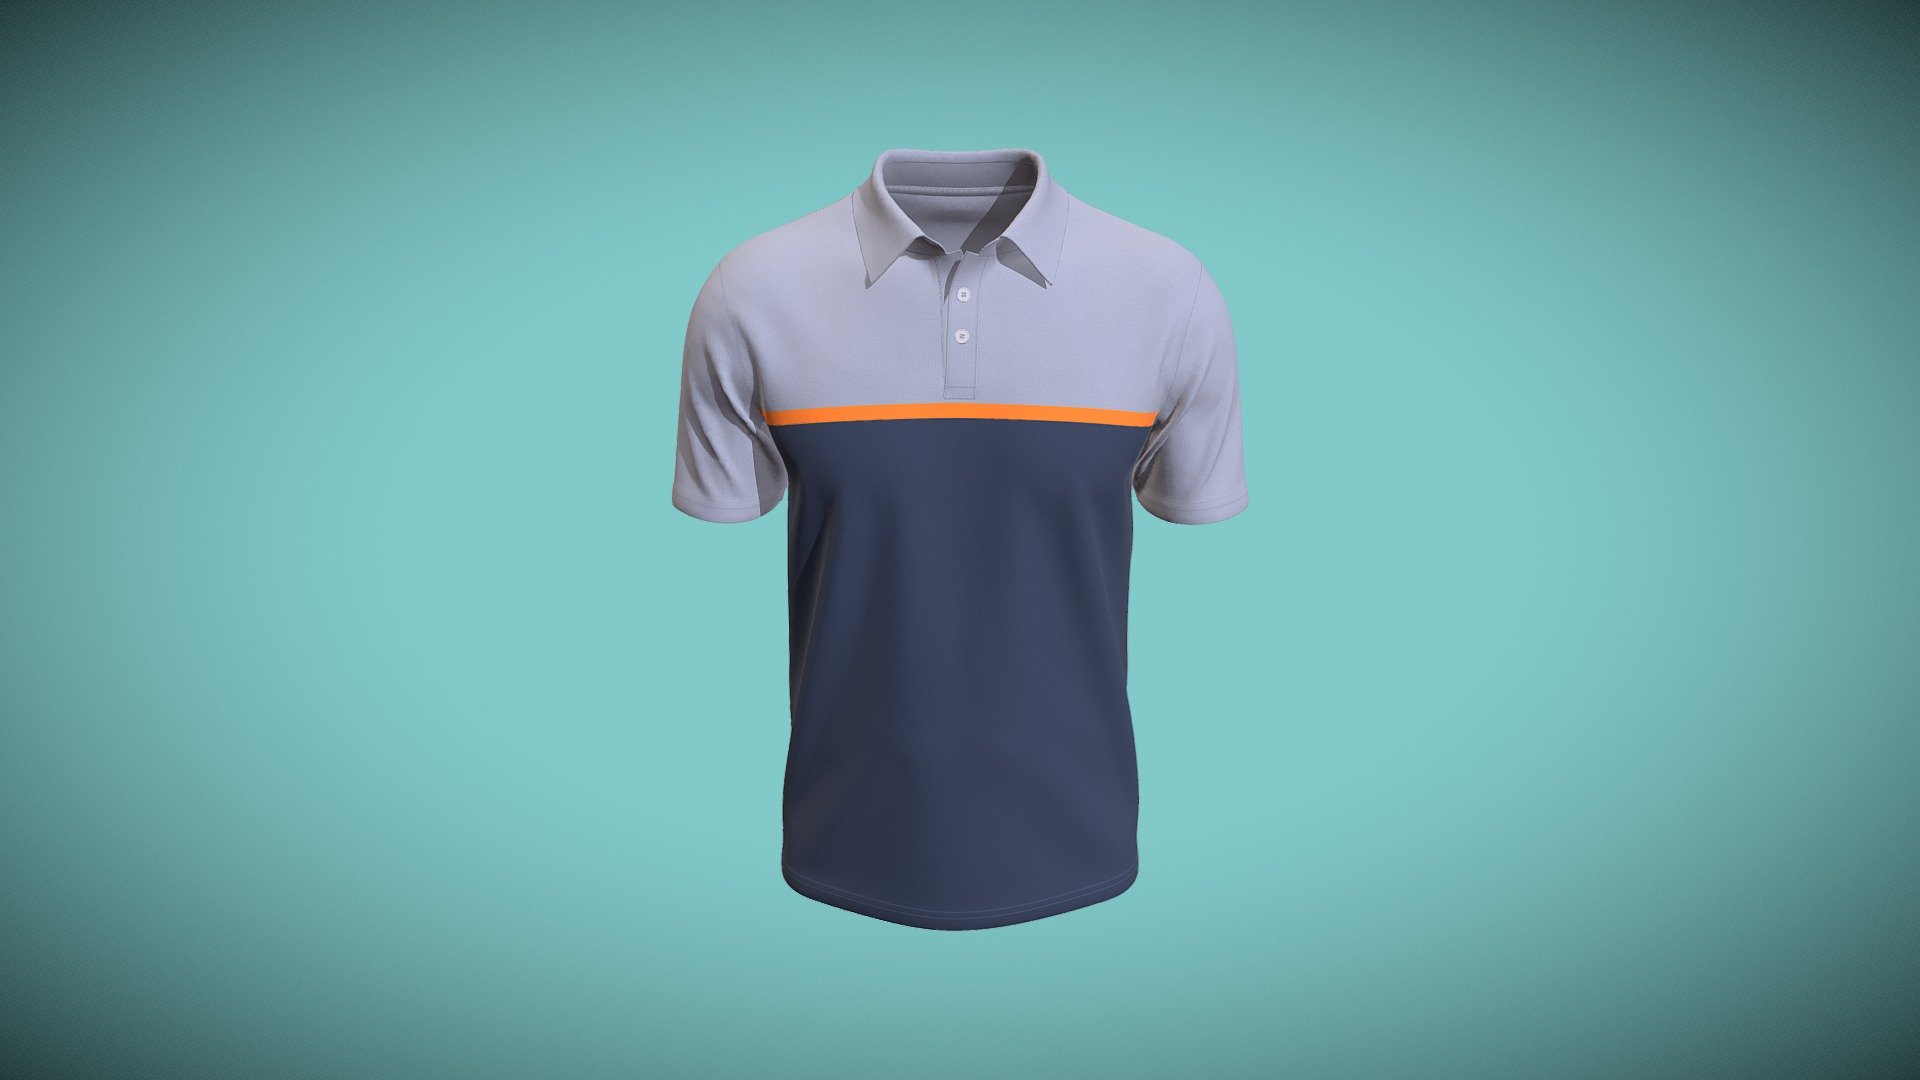 Cloth Title = Fashion Polo 

SKU = DG100202 

Category = Men 

Product Type = Polo 

Cloth Length = Regular 

Body Fit = Regular Fit 

Occasion = Casual  

Sleeve Style = Short Sleeve 


Our Services:

3D Apparel Design.

OBJ,FBX,GLTF Making with High/Low Poly.

Fabric Digitalization.

Mockup making.

3D Teck Pack.

Pattern Making.

2D Illustration.

Cloth Animation and 360 Spin Video.


Contact us:- 

Email: info@digitalfashionwear.com 

Website: https://digitalfashionwear.com 


We designed all the types of cloth specially focused on product visualization, e-commerce, fitting, and production. 

We will design: 

T-shirts 

Polo shirts 

Hoodies 

Sweatshirt 

Jackets 

Shirts 

TankTops 

Trousers 

Bras 

Underwear 

Blazer 

Aprons 

Leggings 

and All Fashion items. 





Our goal is to make sure what we provide you, meets your demand 3d model